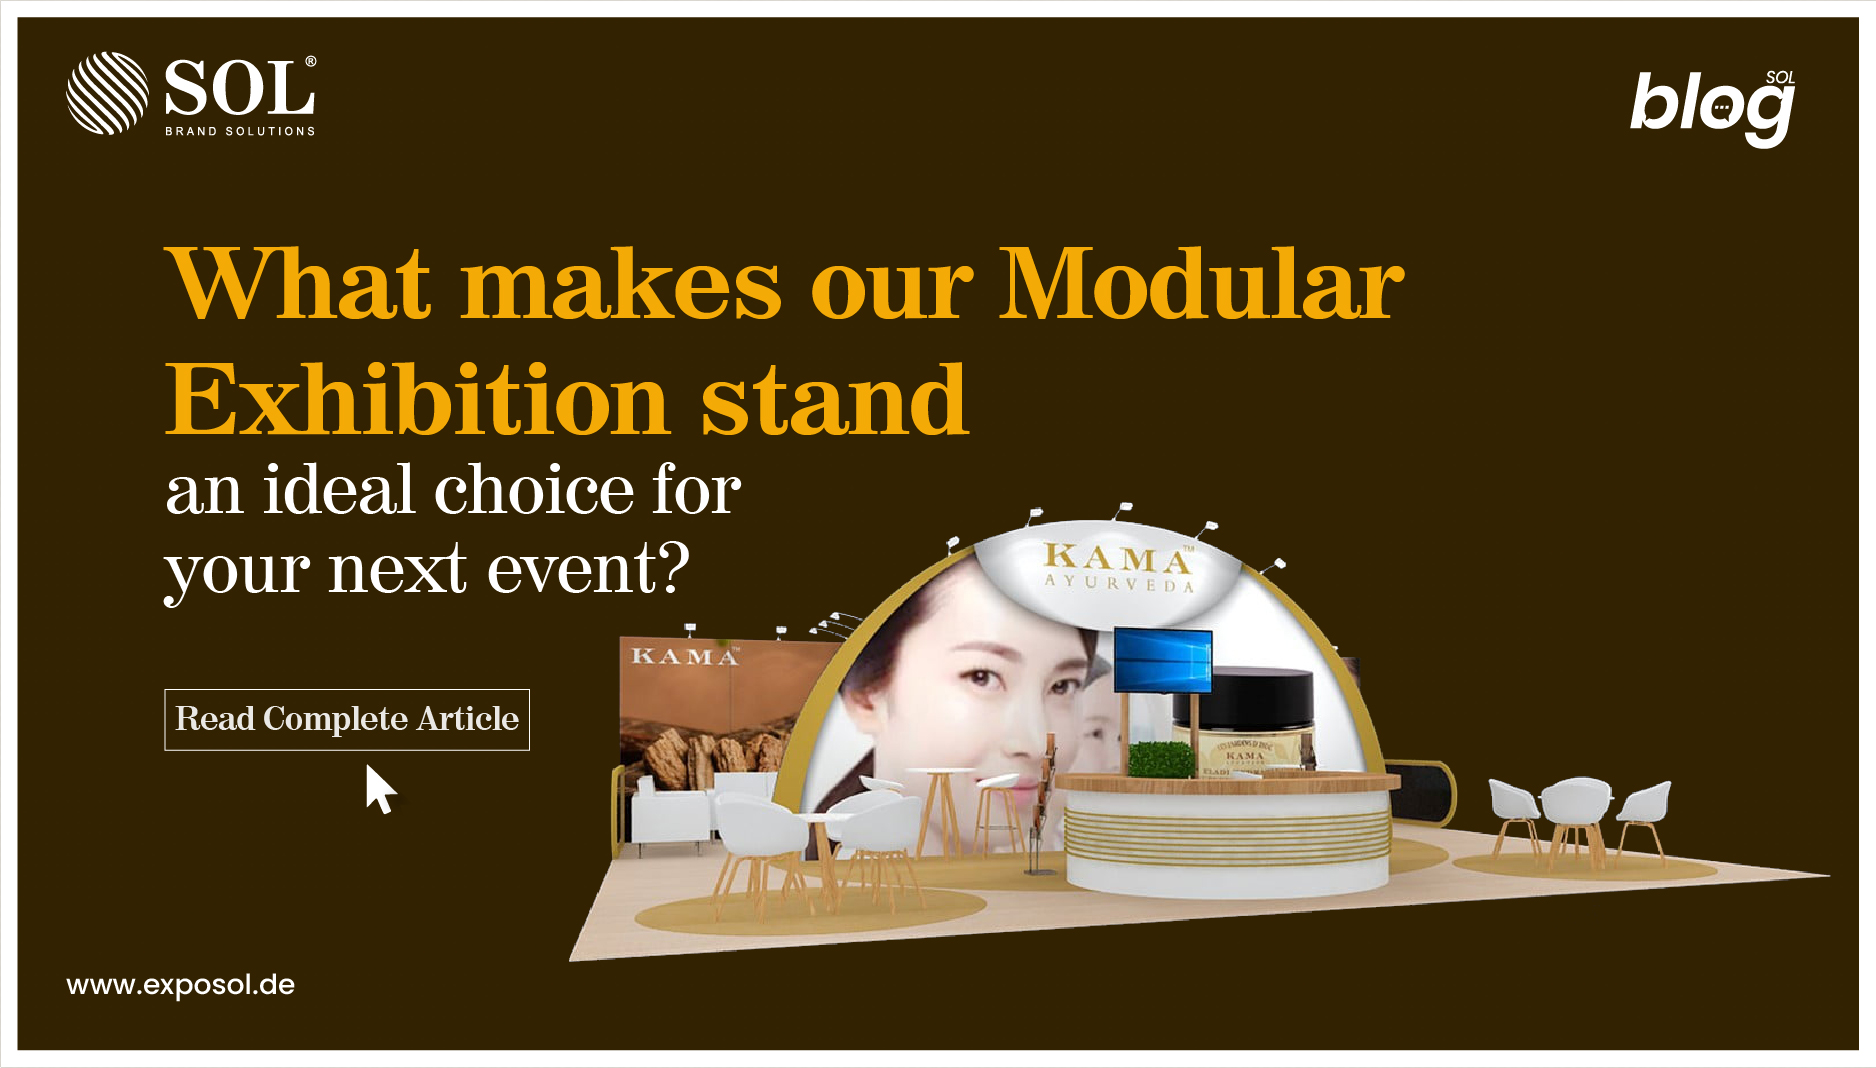 WHAT MAKES OUR MODULAR EXHIBITION STAND AN IDEAL CHOICE FOR YOUR NEXT EVENT?